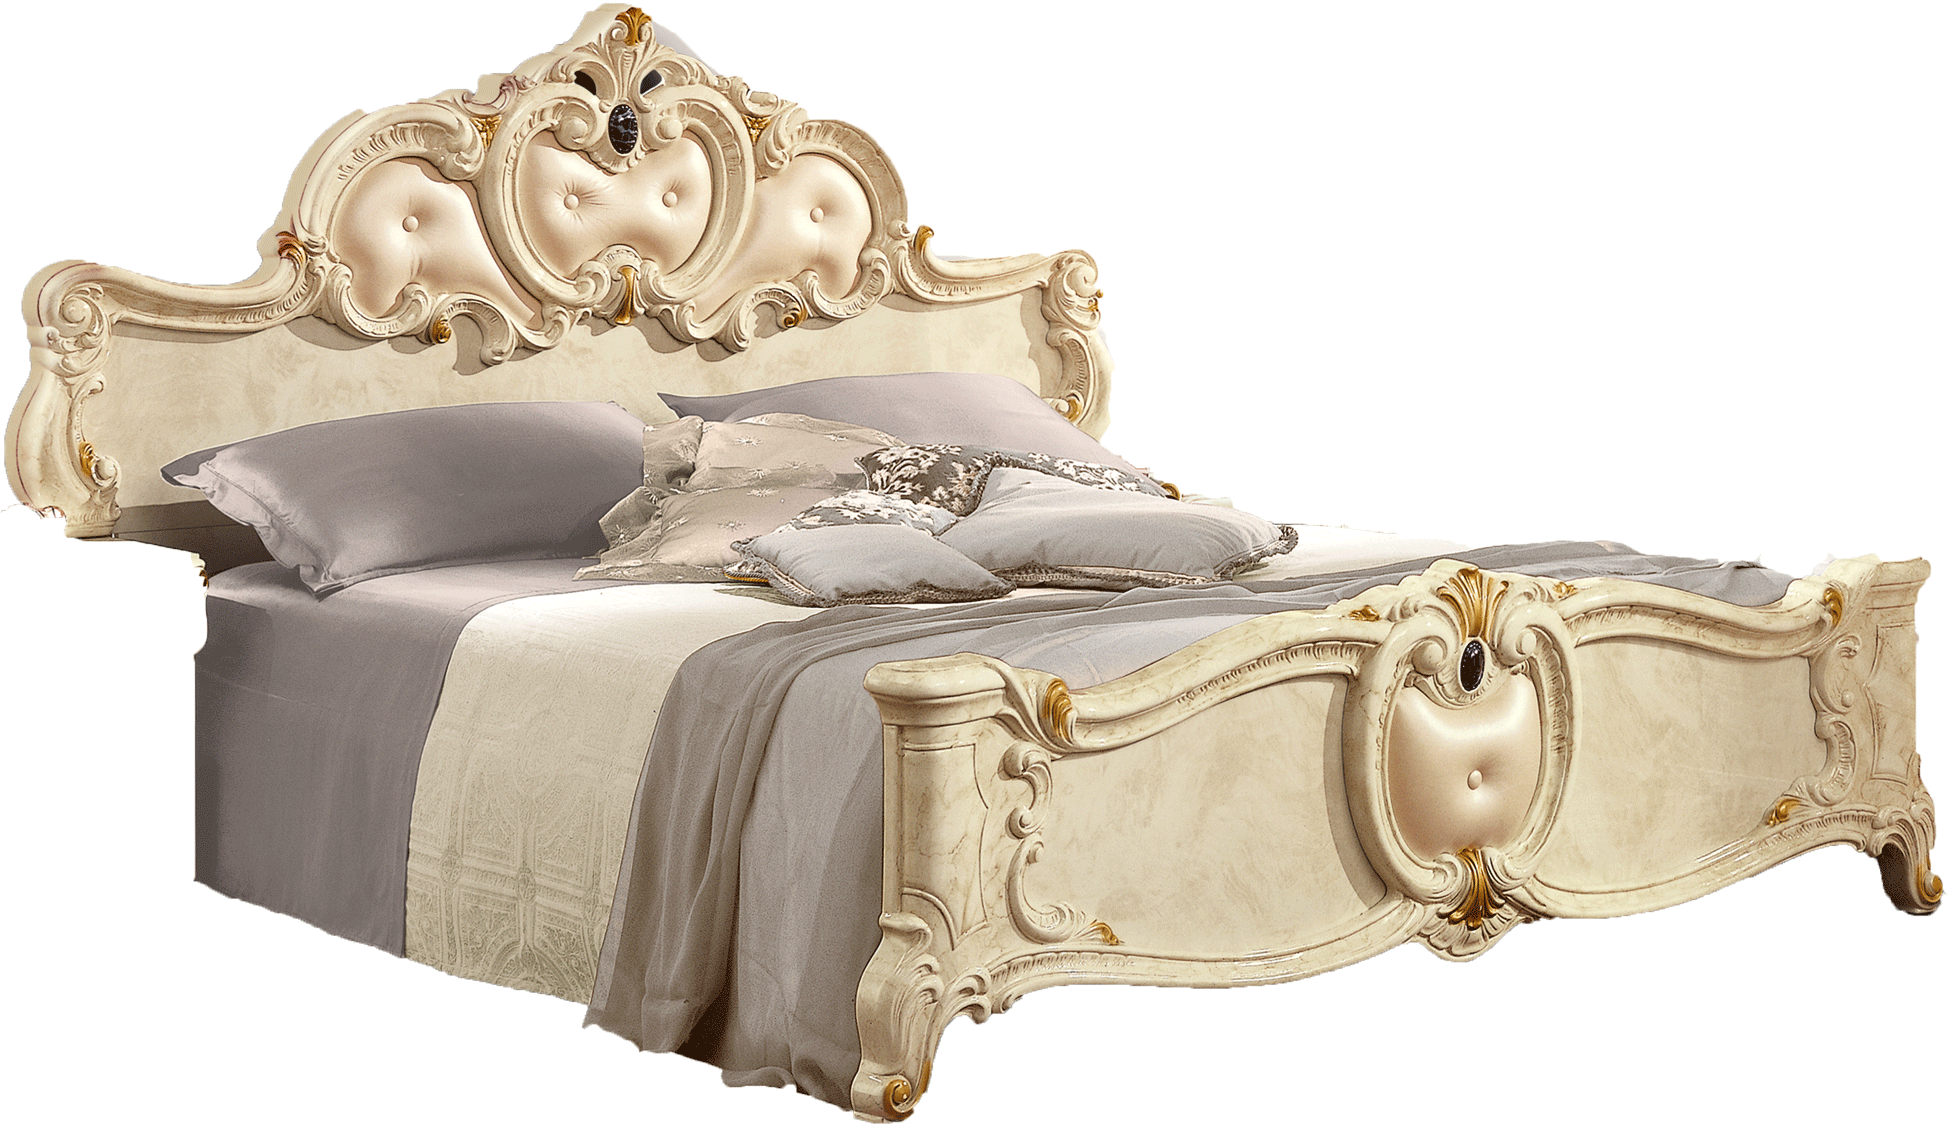 Brands Camel Gold Collection, Italy Barocco Bed Ivory, Camelgroup Italy